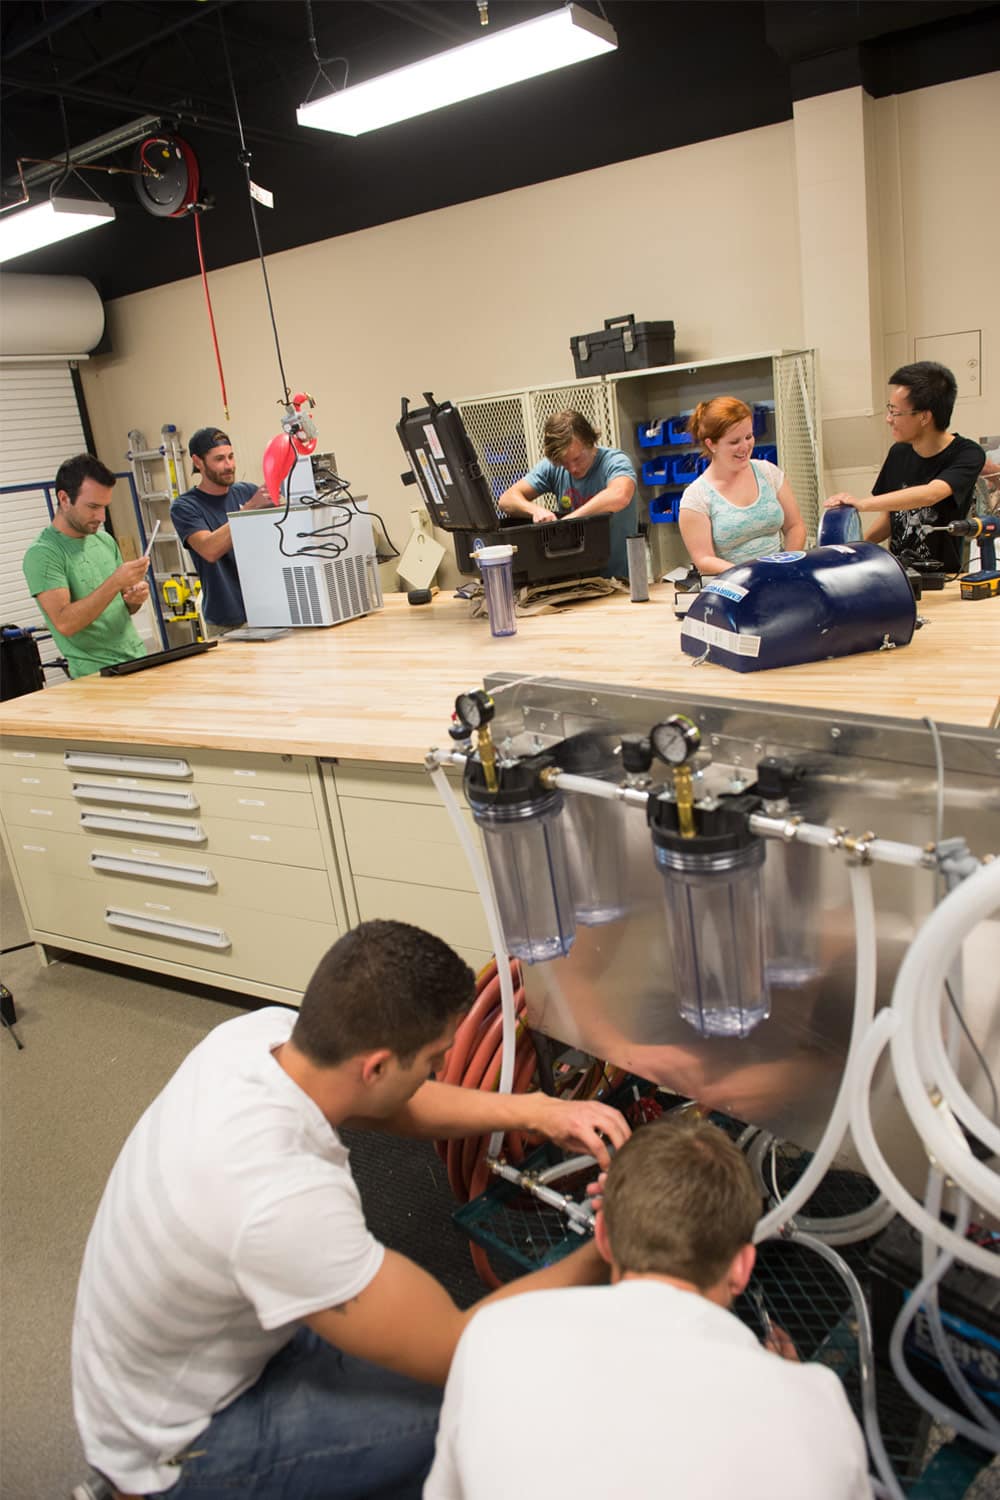 Students work on a water system in the Clean Energy Systems Laboratory